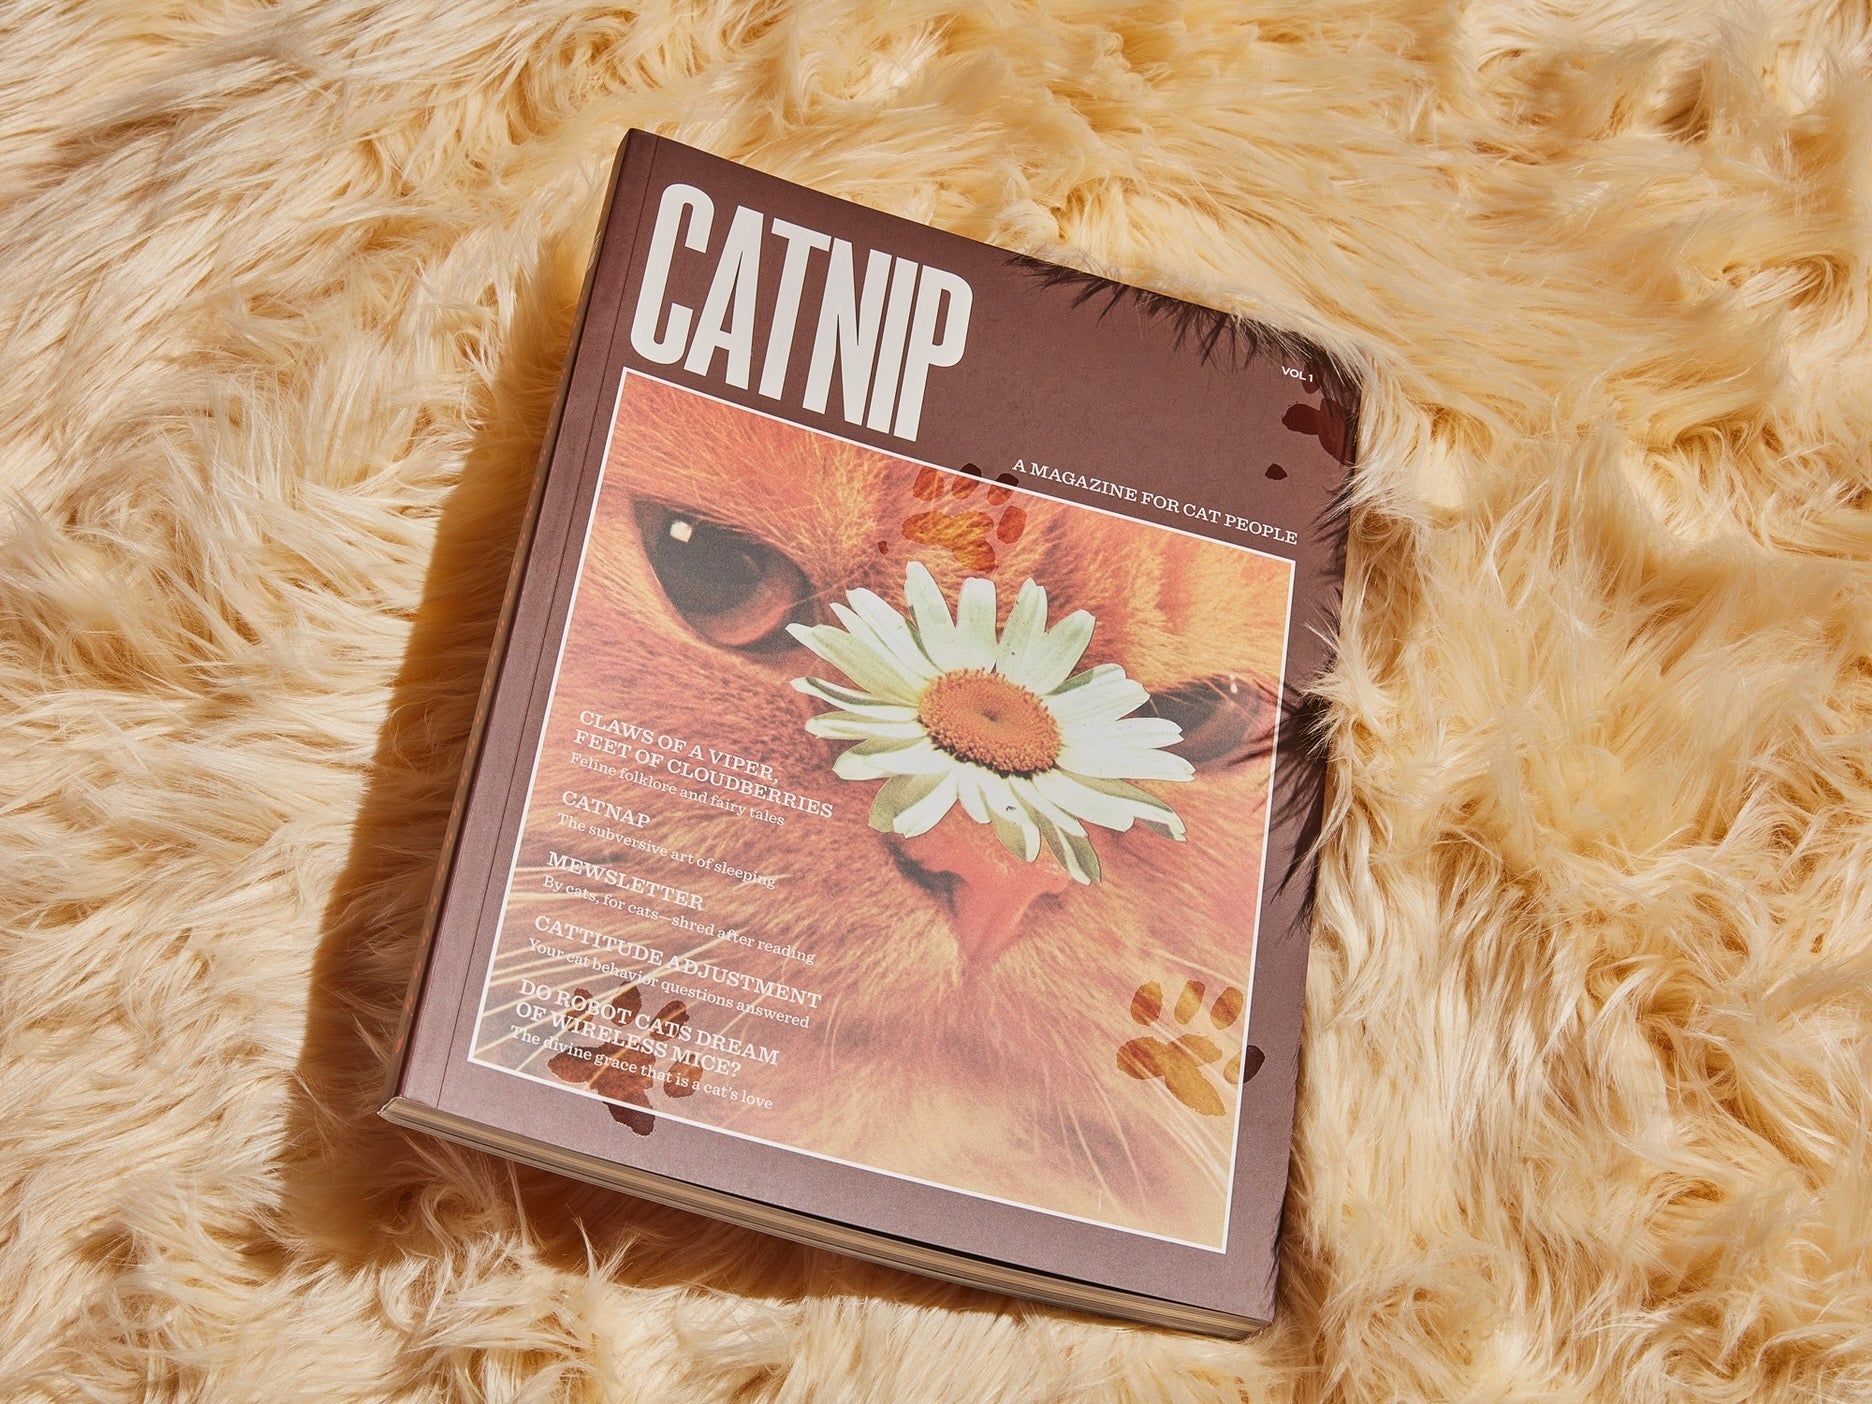 CATNIP: A MAGAZINE FOR CAT PEOPLE